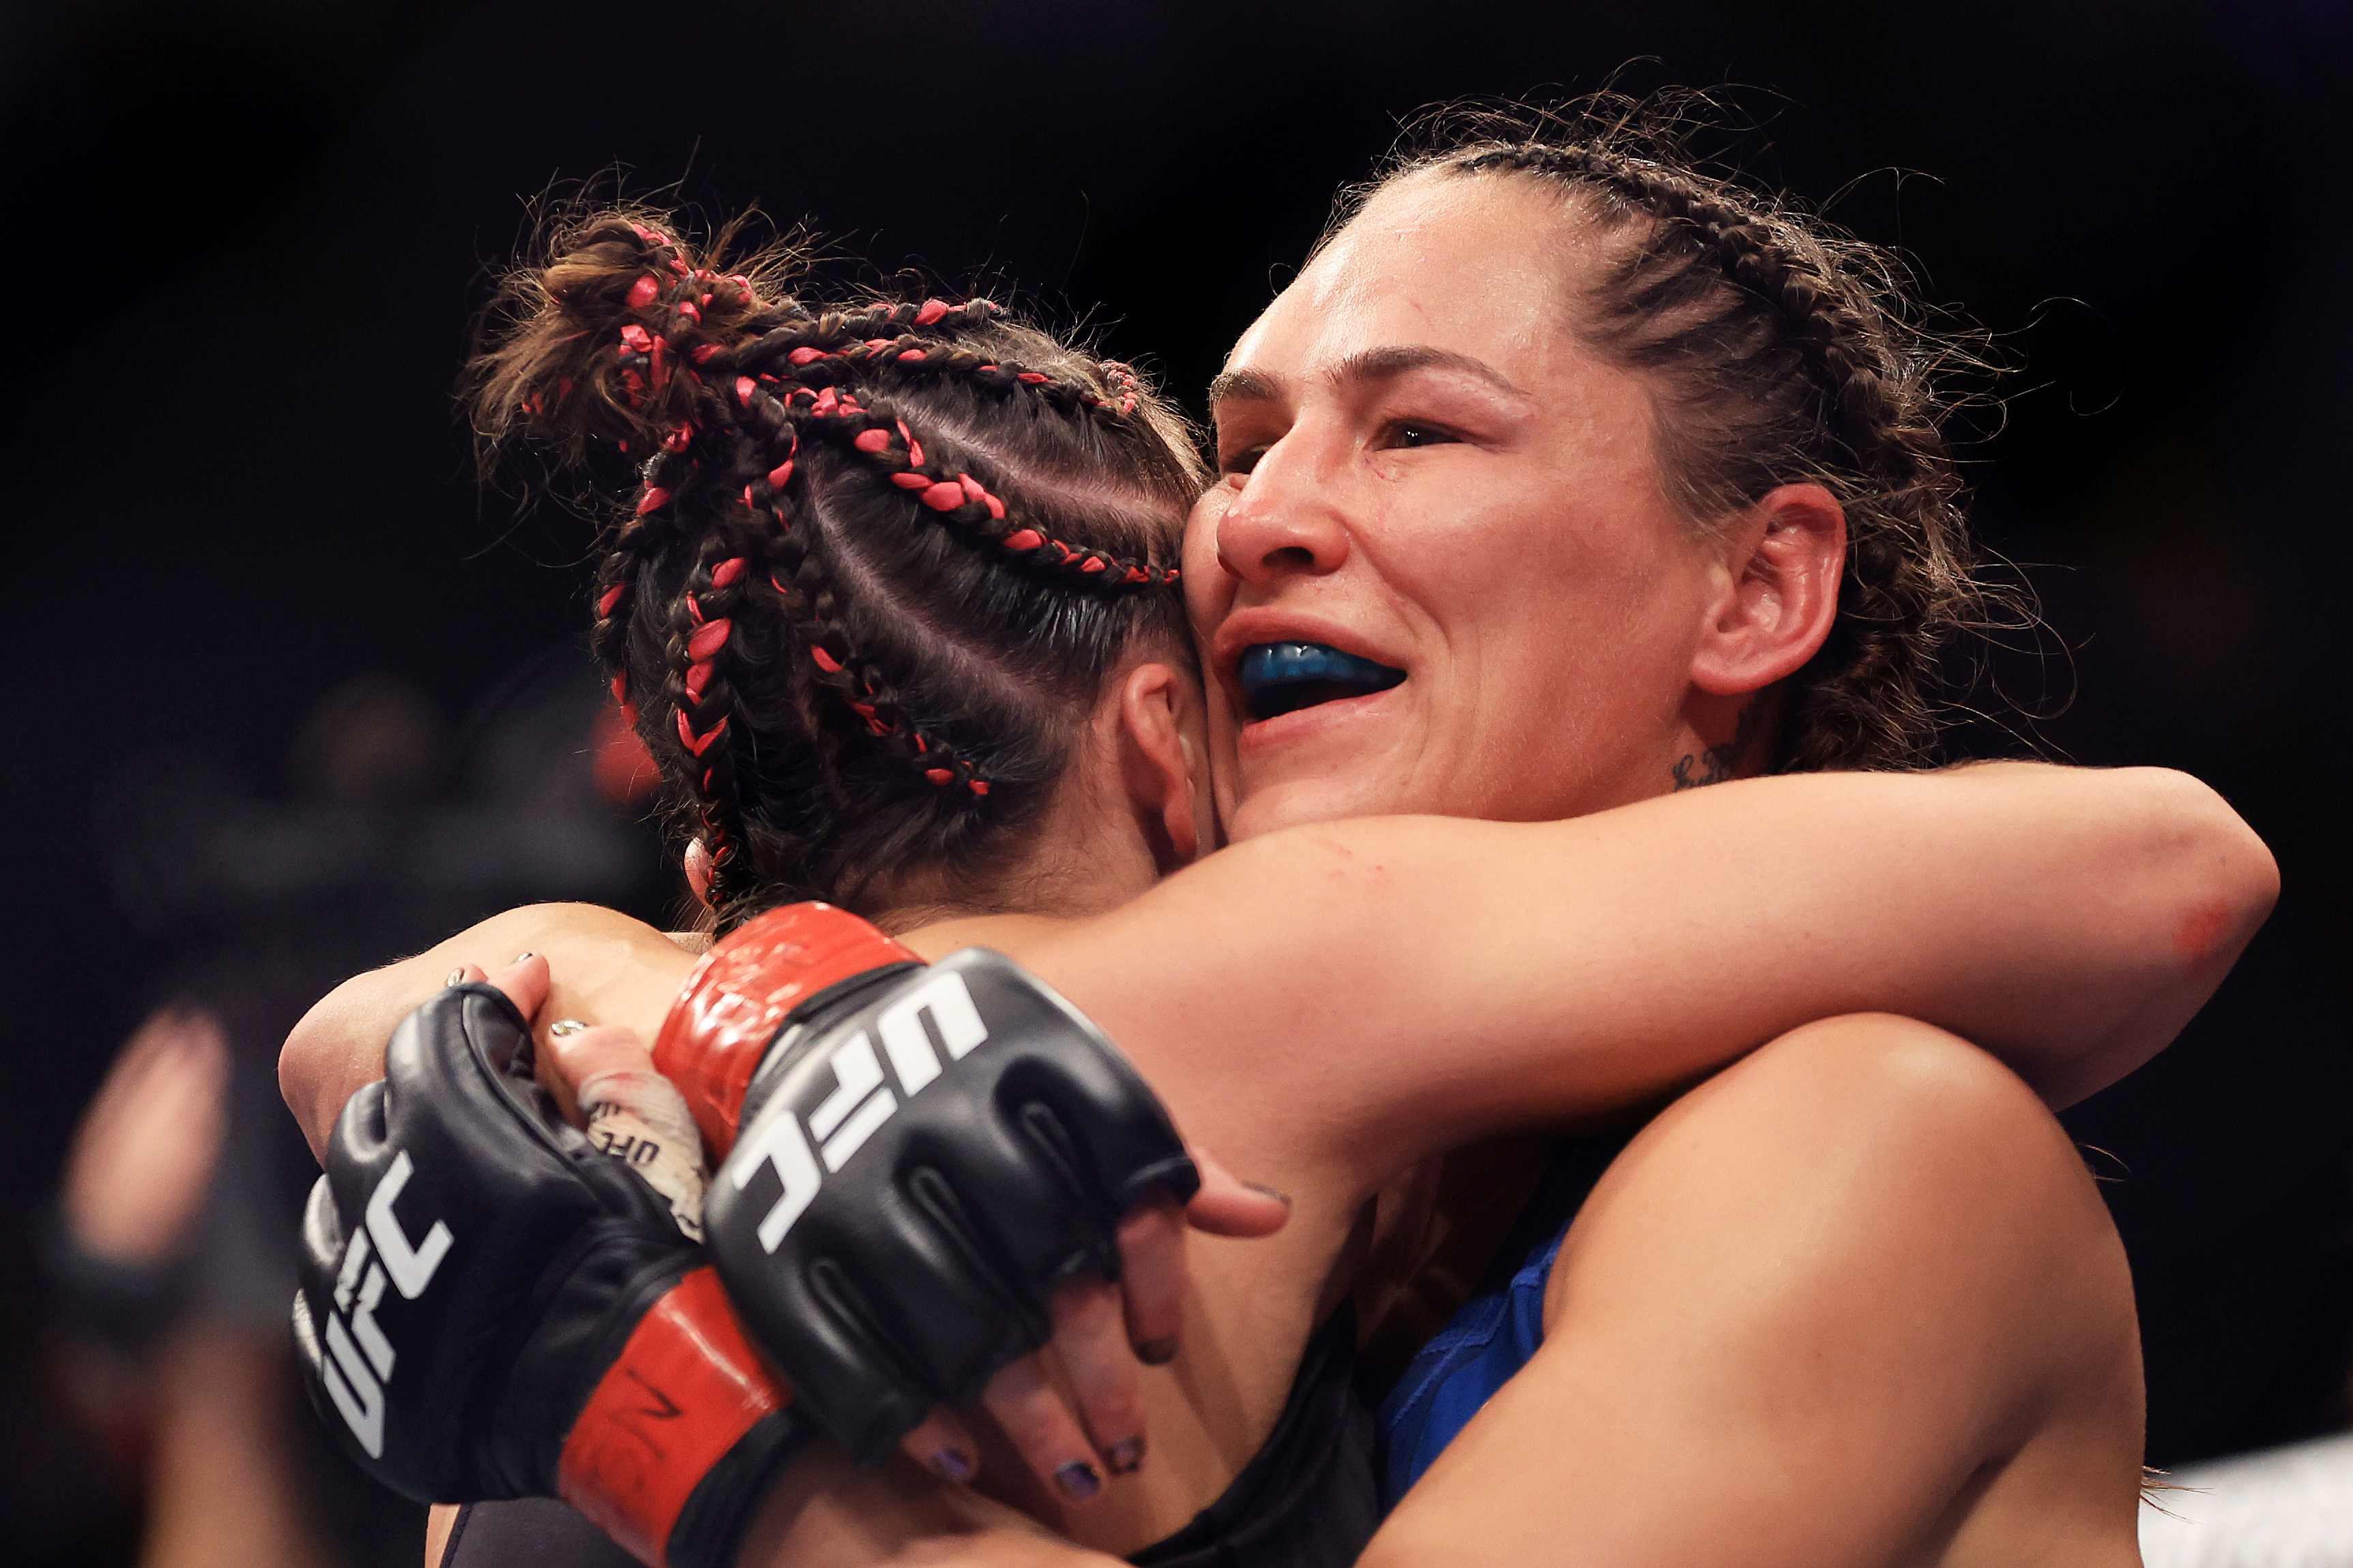 Jessica Eye retired after a decision loss to Maycee Barber&nbsp;on the UFC 276 early prelims